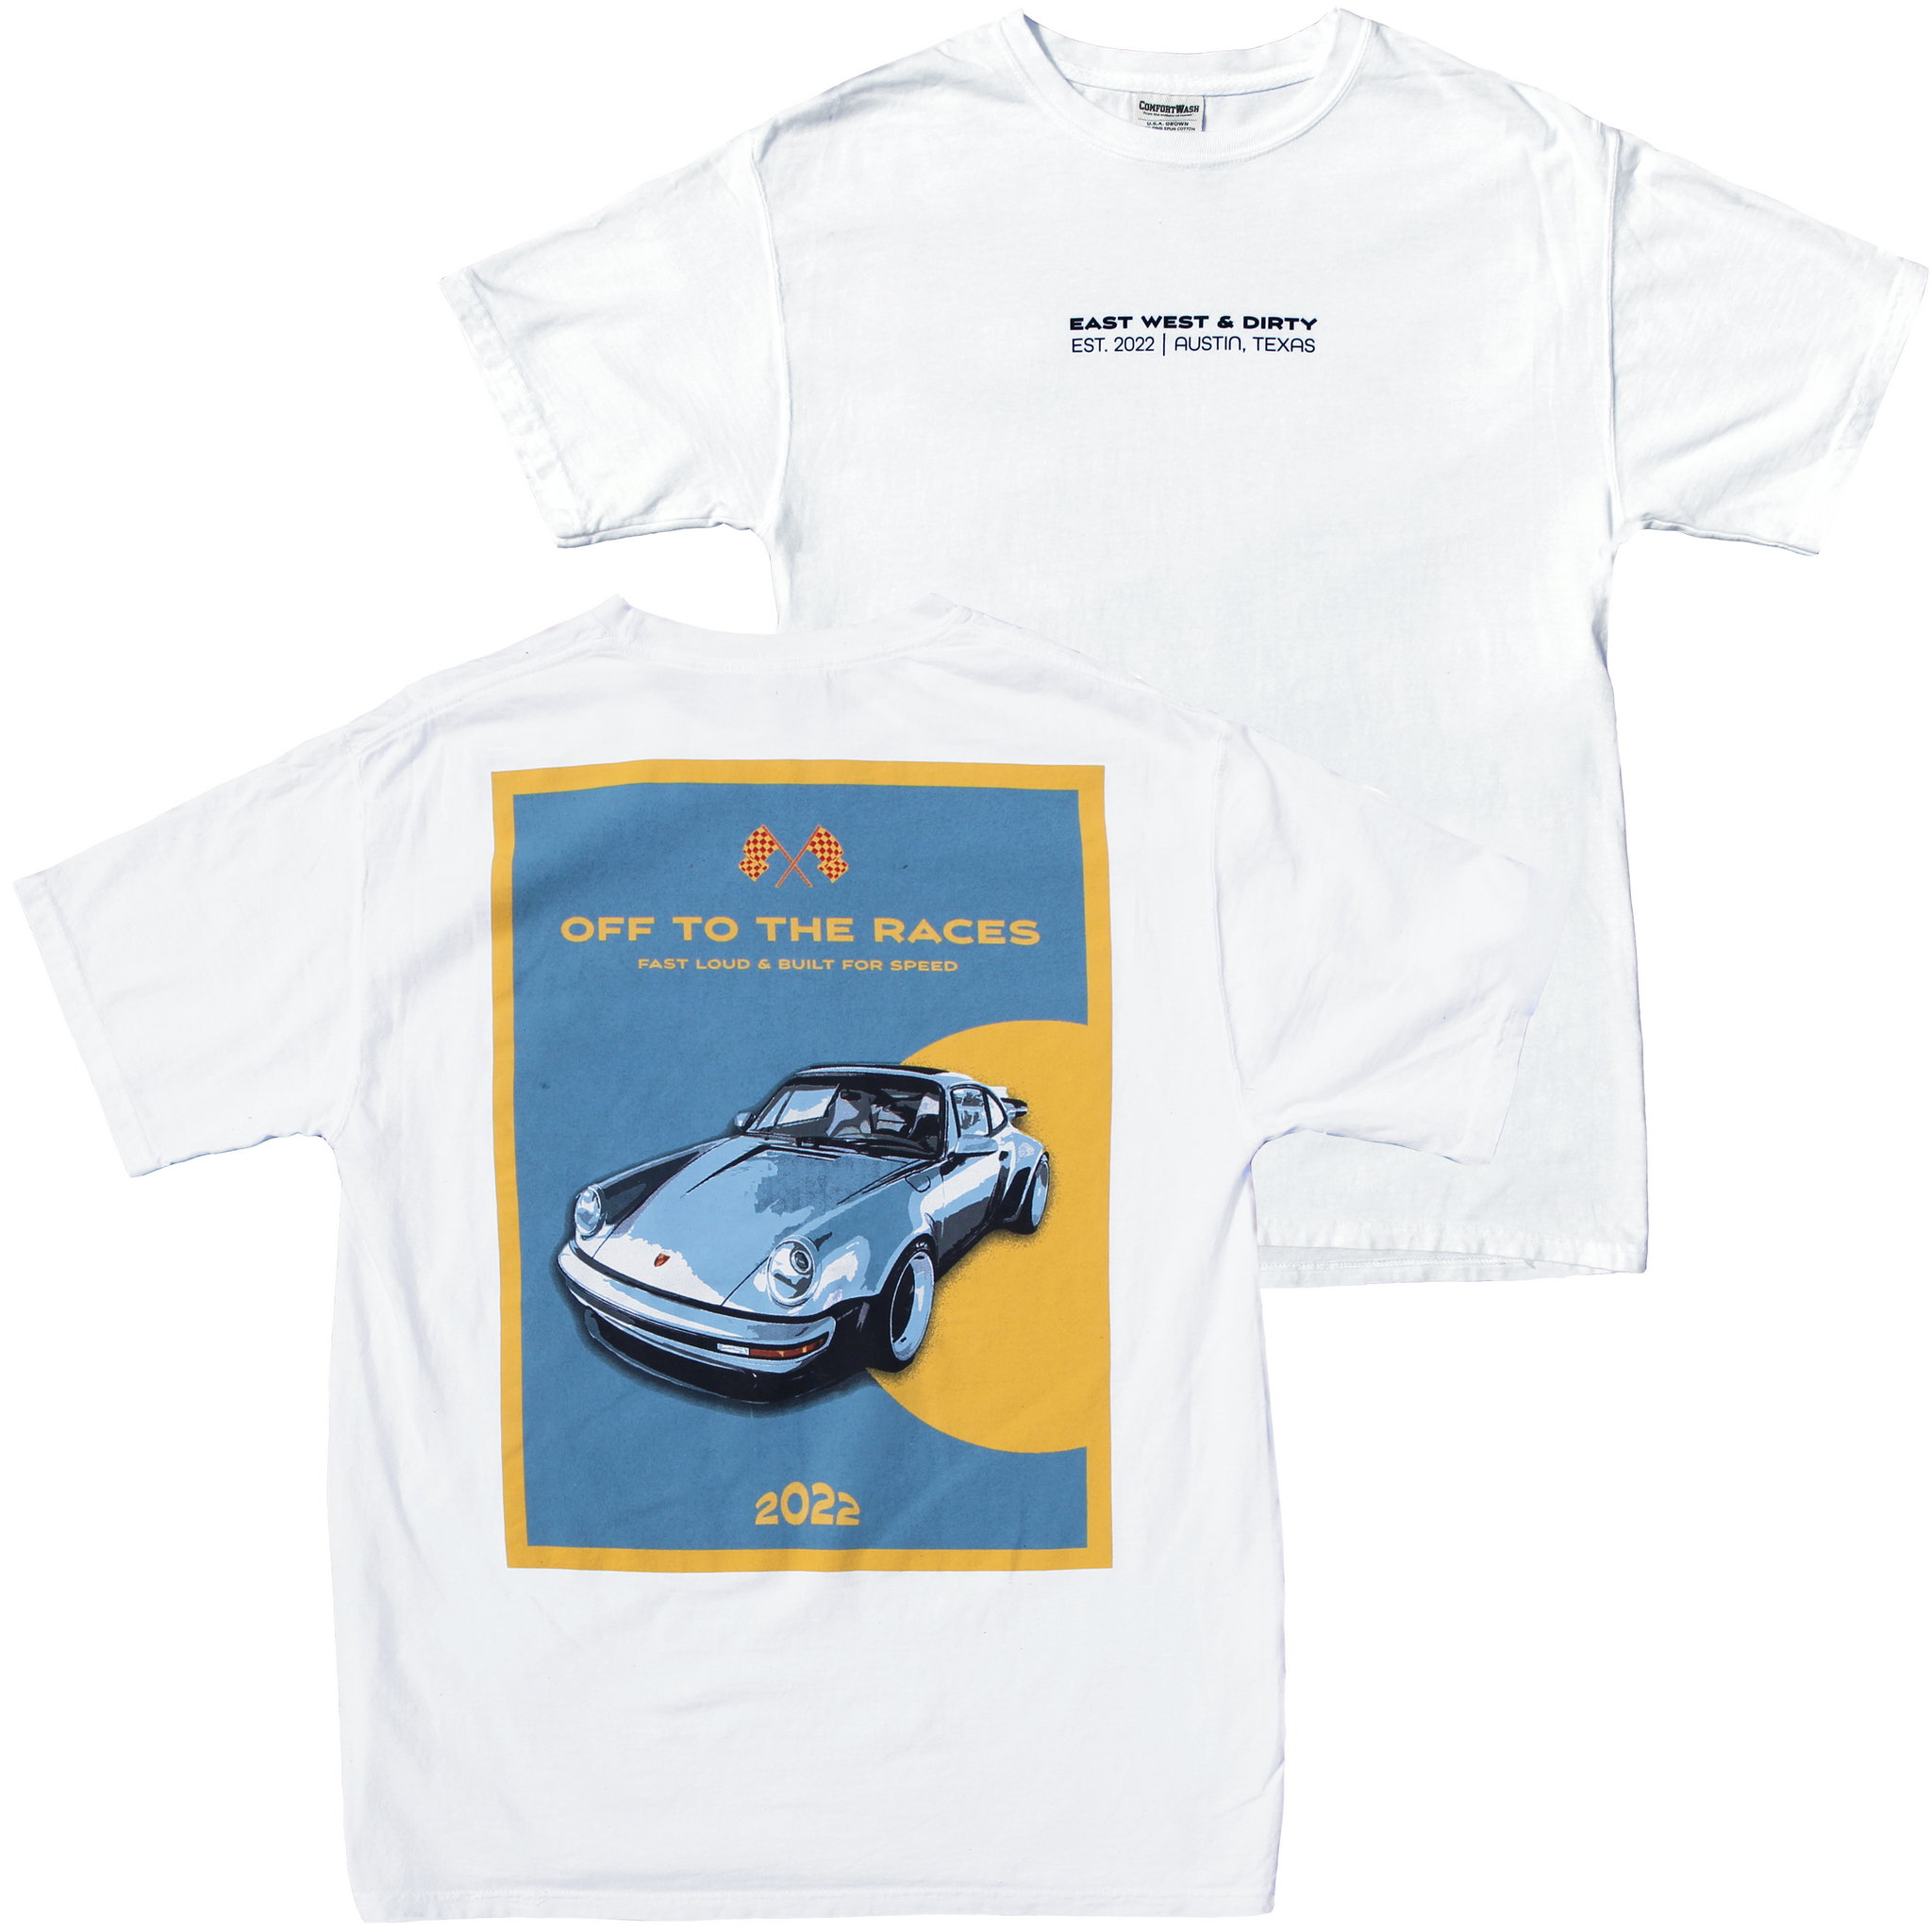 OFF TO THE RACES Tee